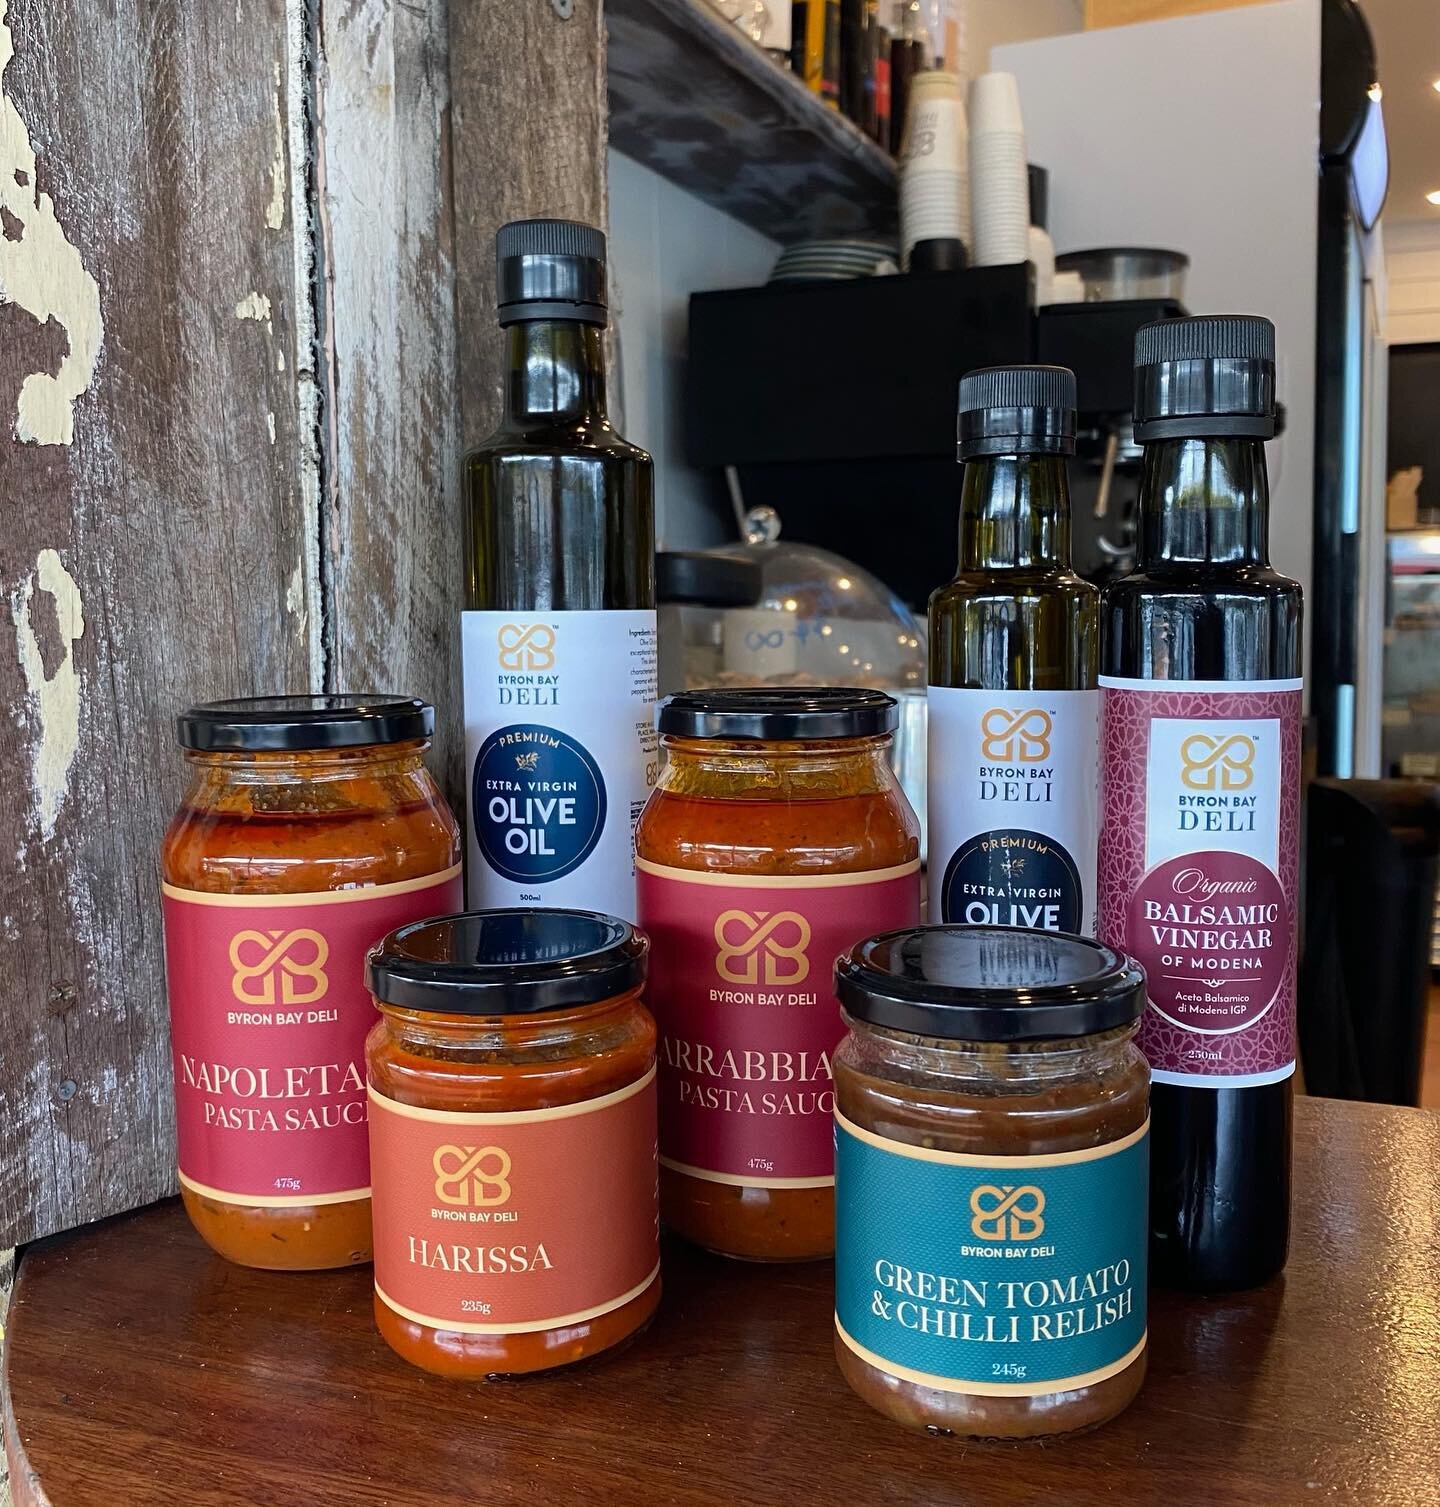 Have you met the new members of the Deli range family? Come in store to try out house-made pasta sauces, green tomato &amp; chilli relish, harissa and sherry vinegar 🍅